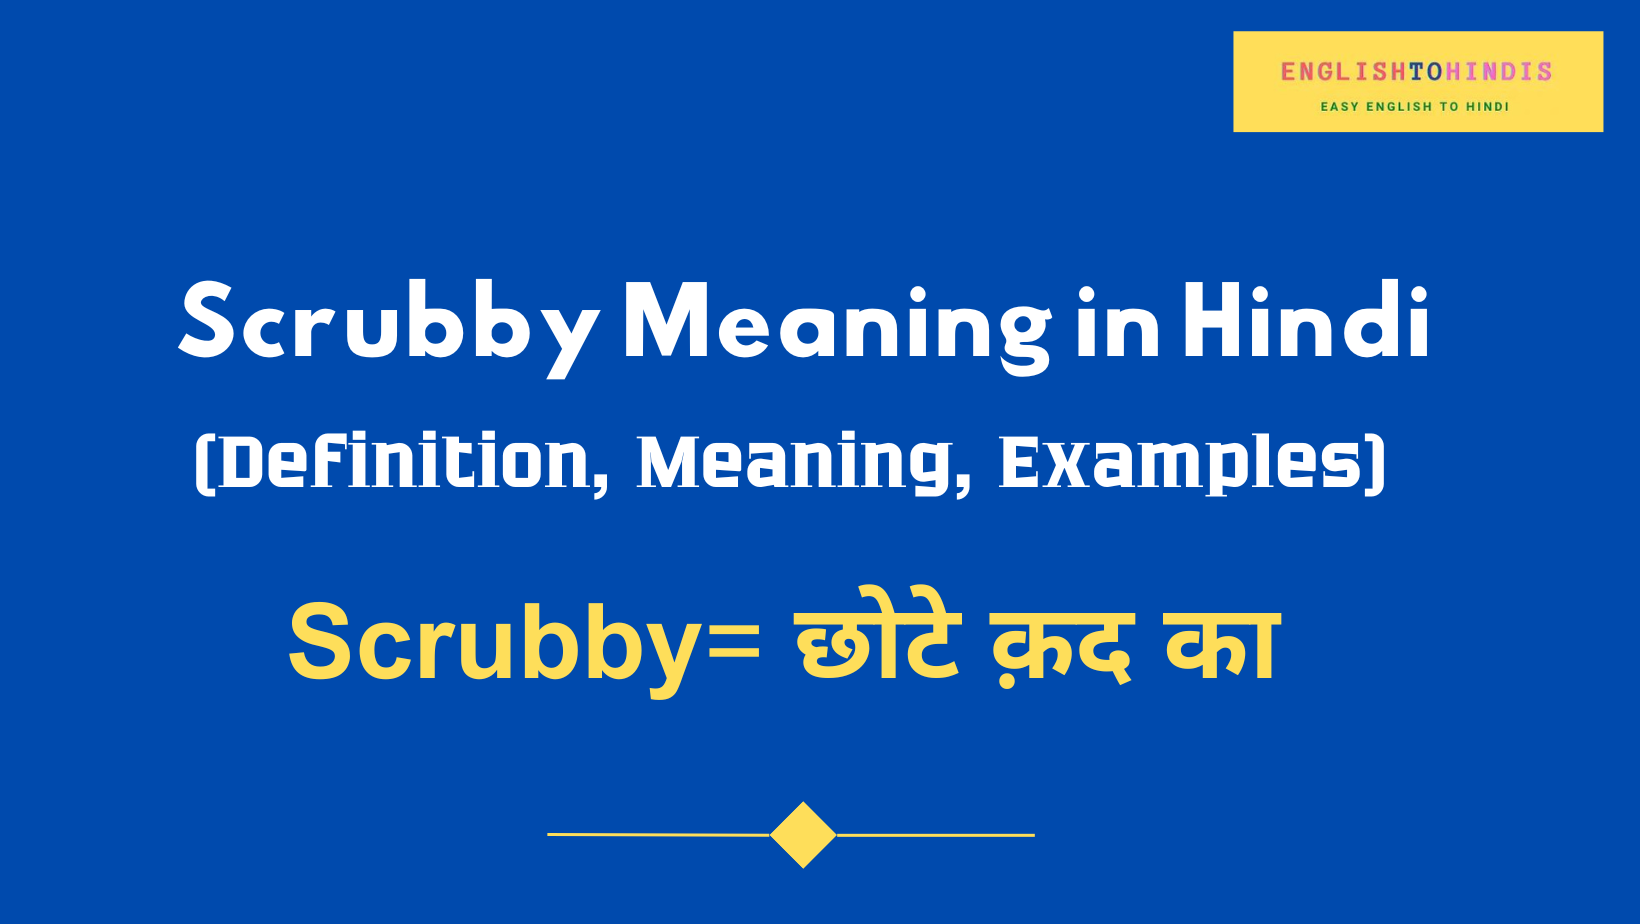 Scrubby meaning in Hindi